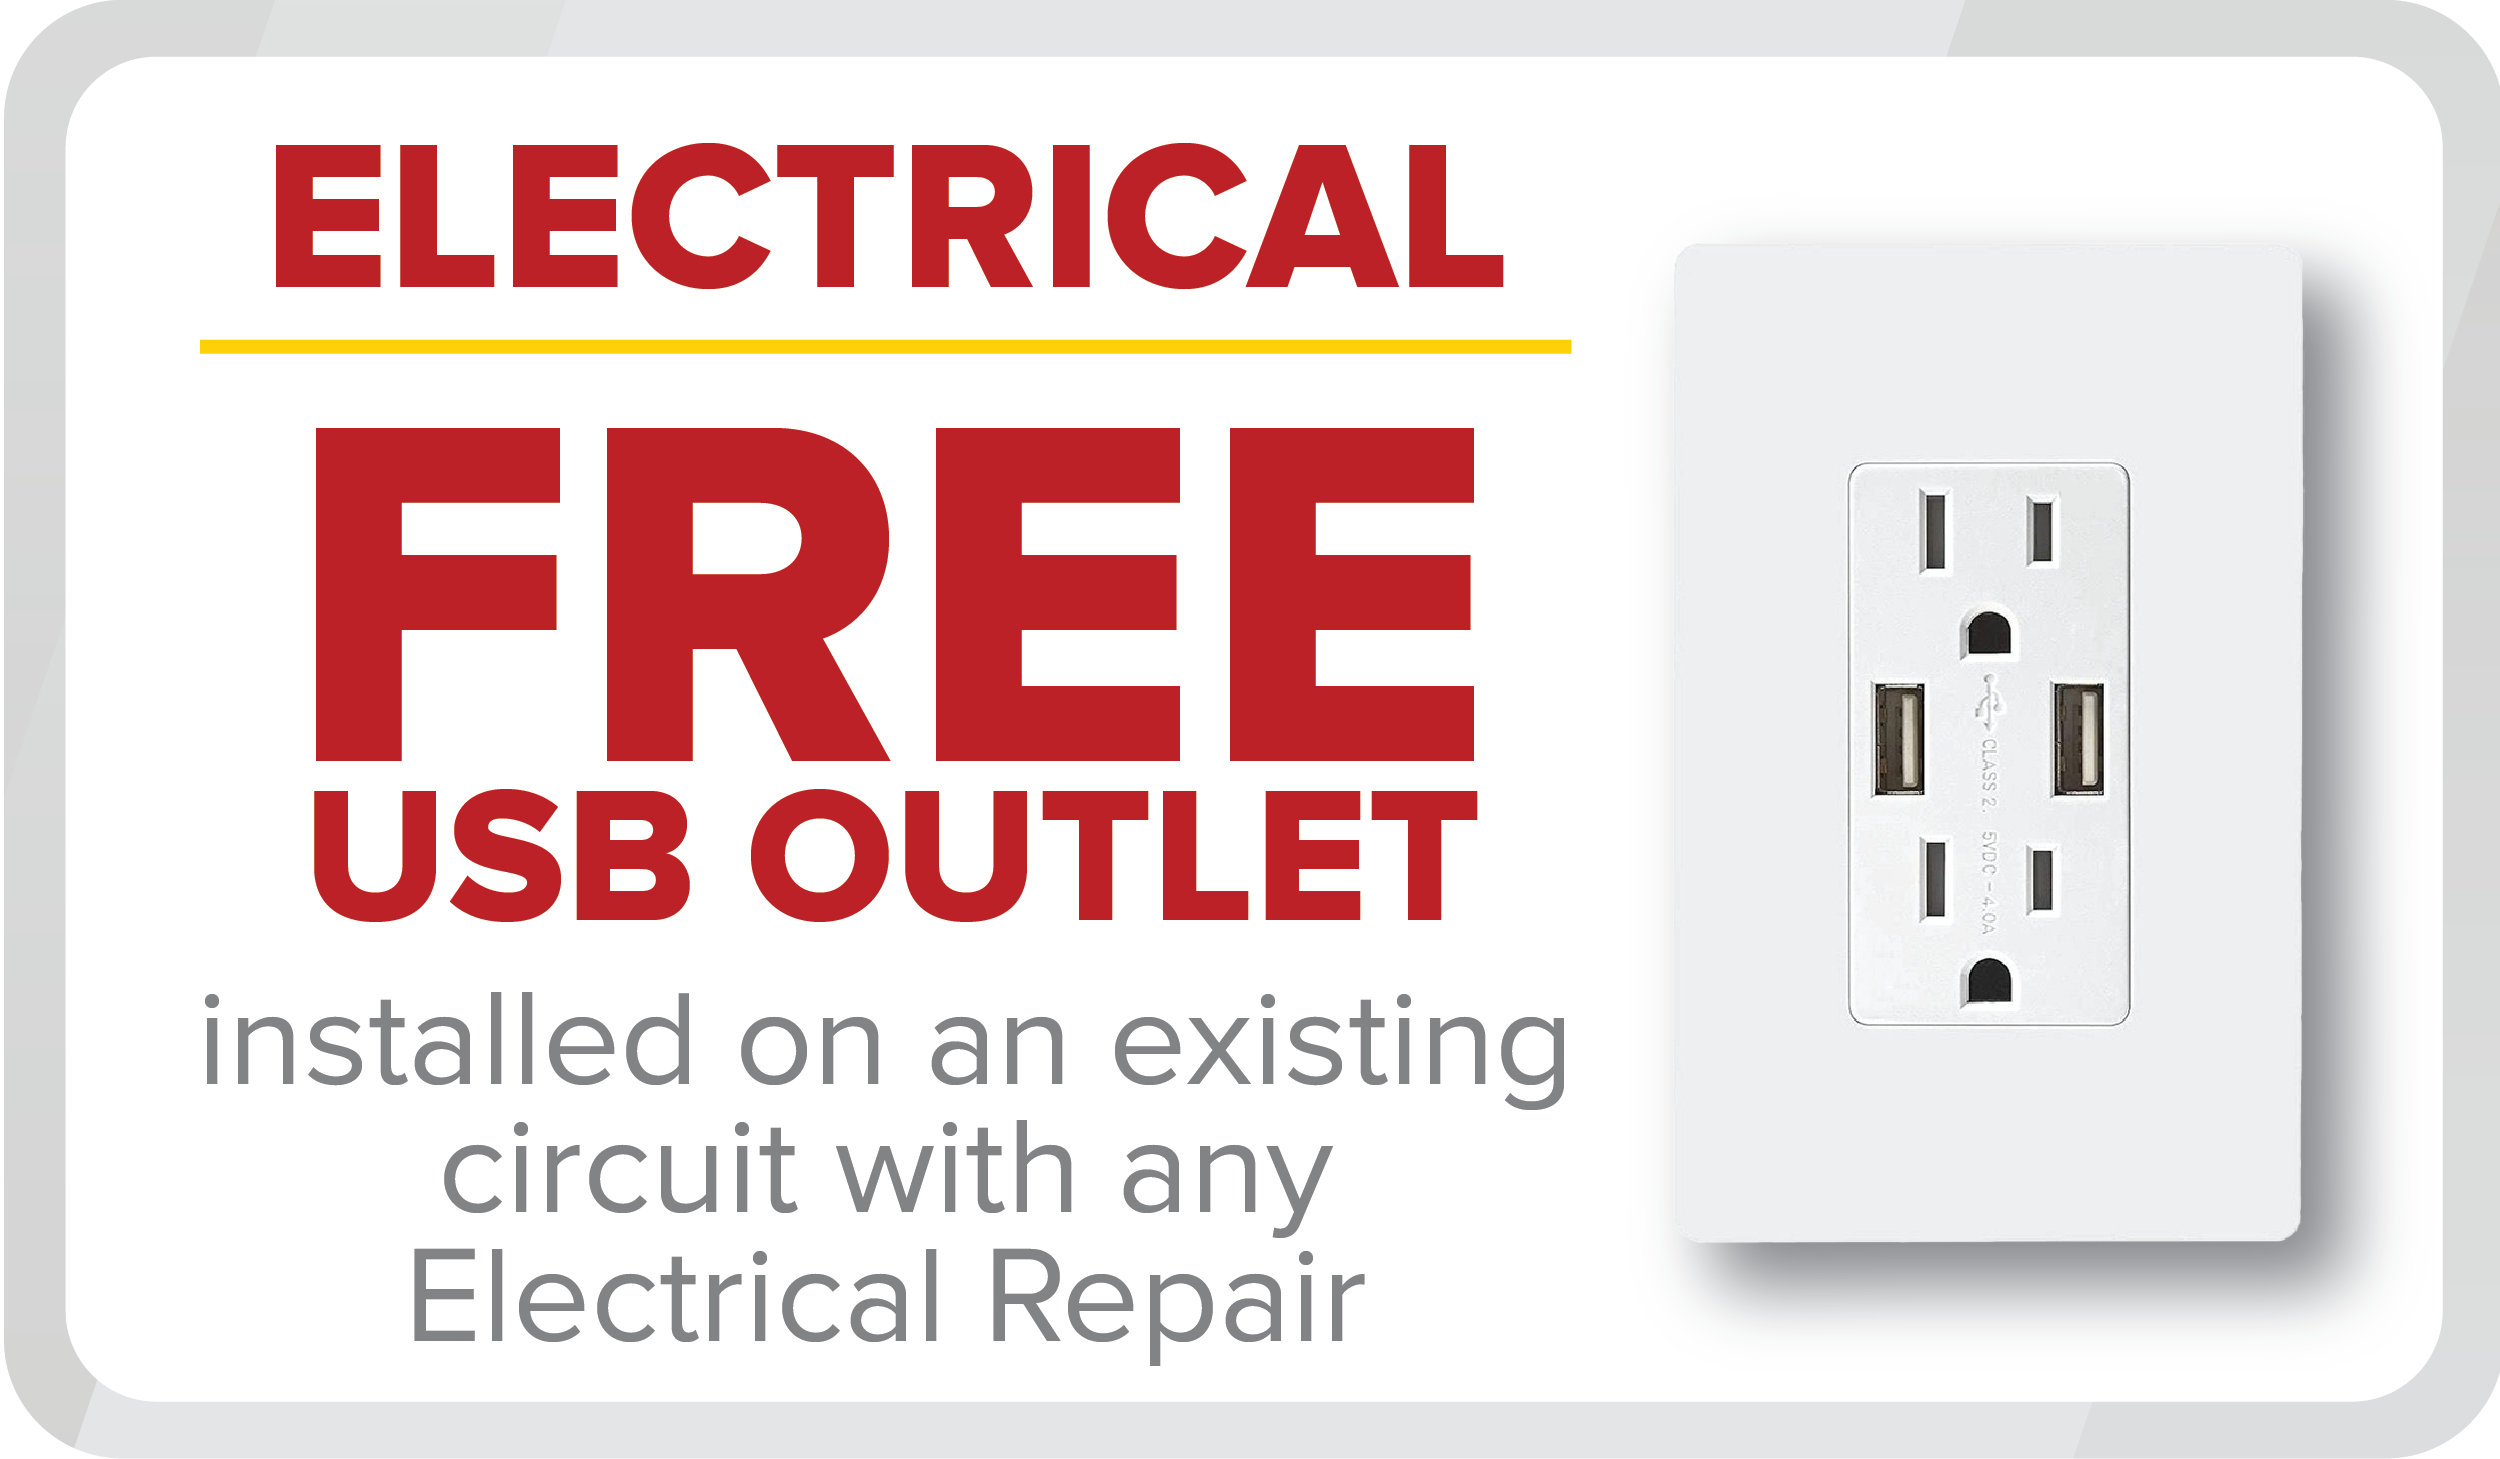 Free USB Outlet Upgrade on an existing outlet with any Electrical Repair